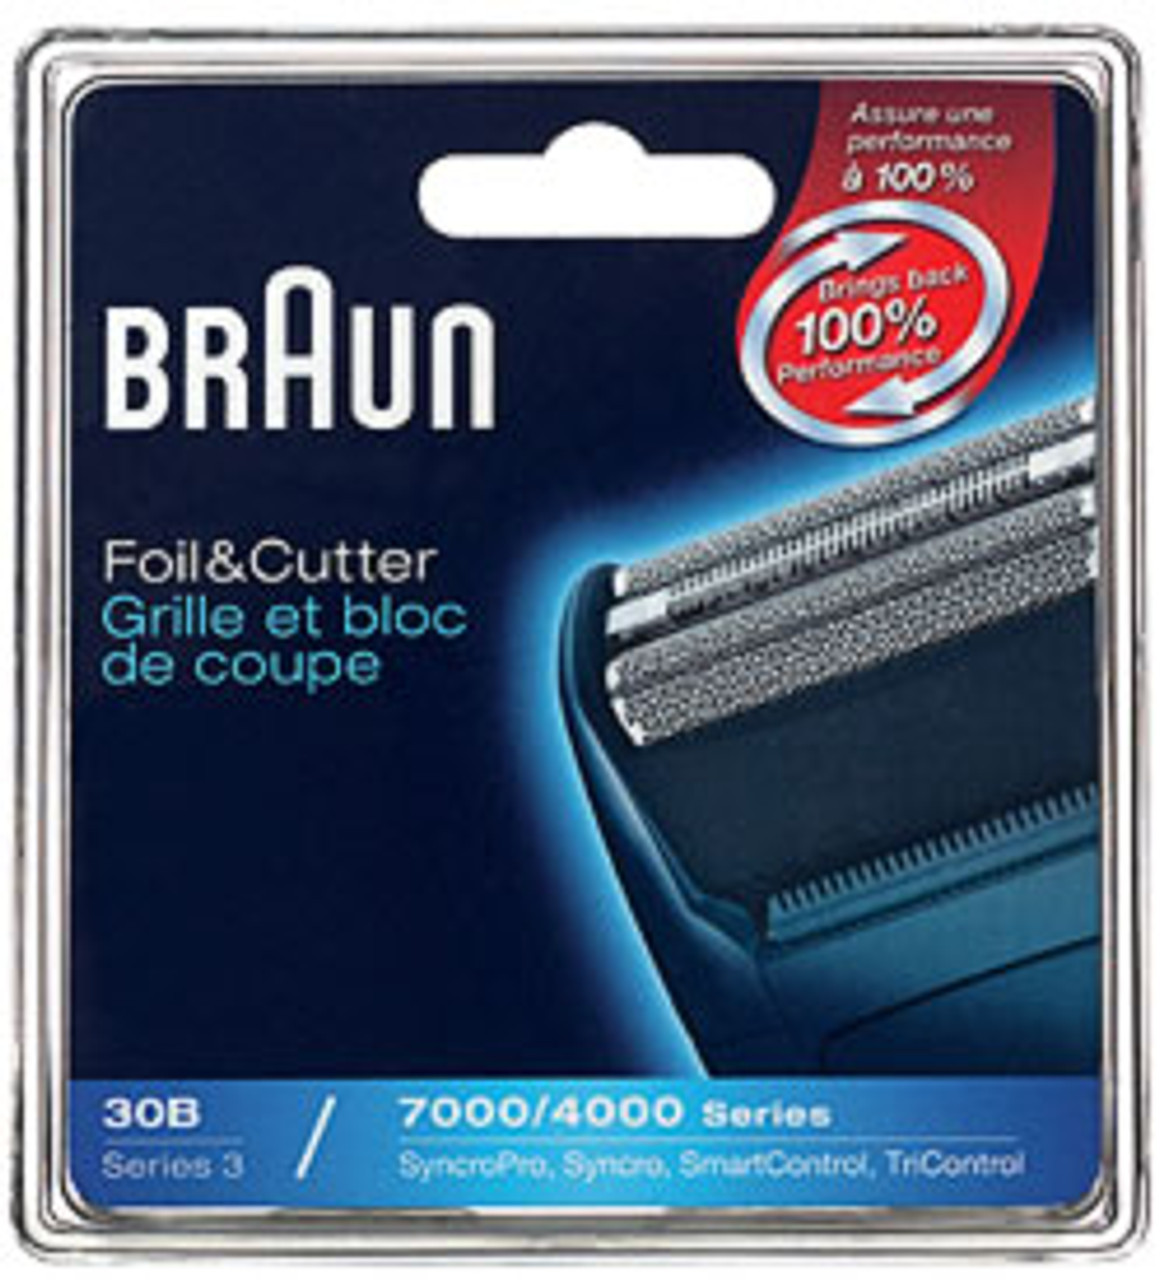 30B Foil for Braun 3 Series Smart Control&4000 SyncroPro&7000 TriControl  Shaver